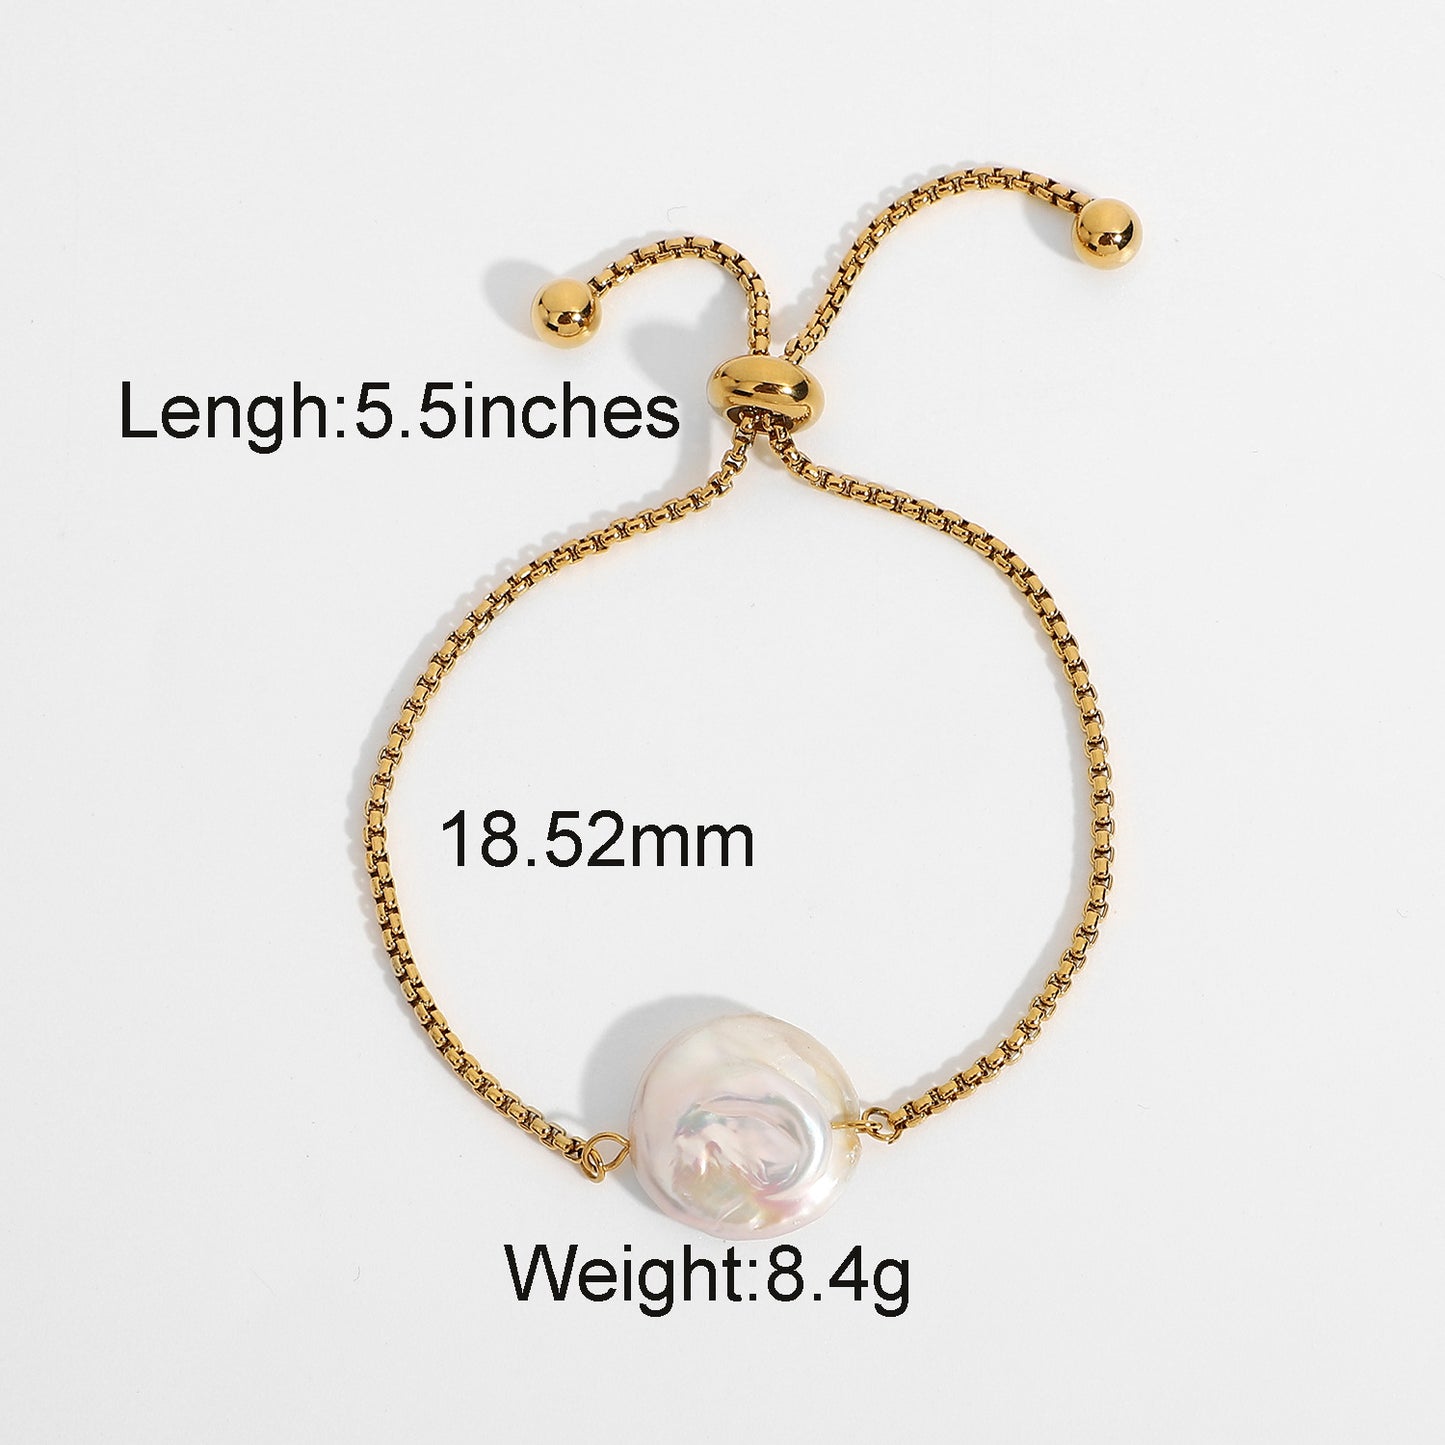 A Freshwater Baroque Pearl Waterproof Jewelry Adjustable Bracelet with a pearl on it, from Maramalive™.